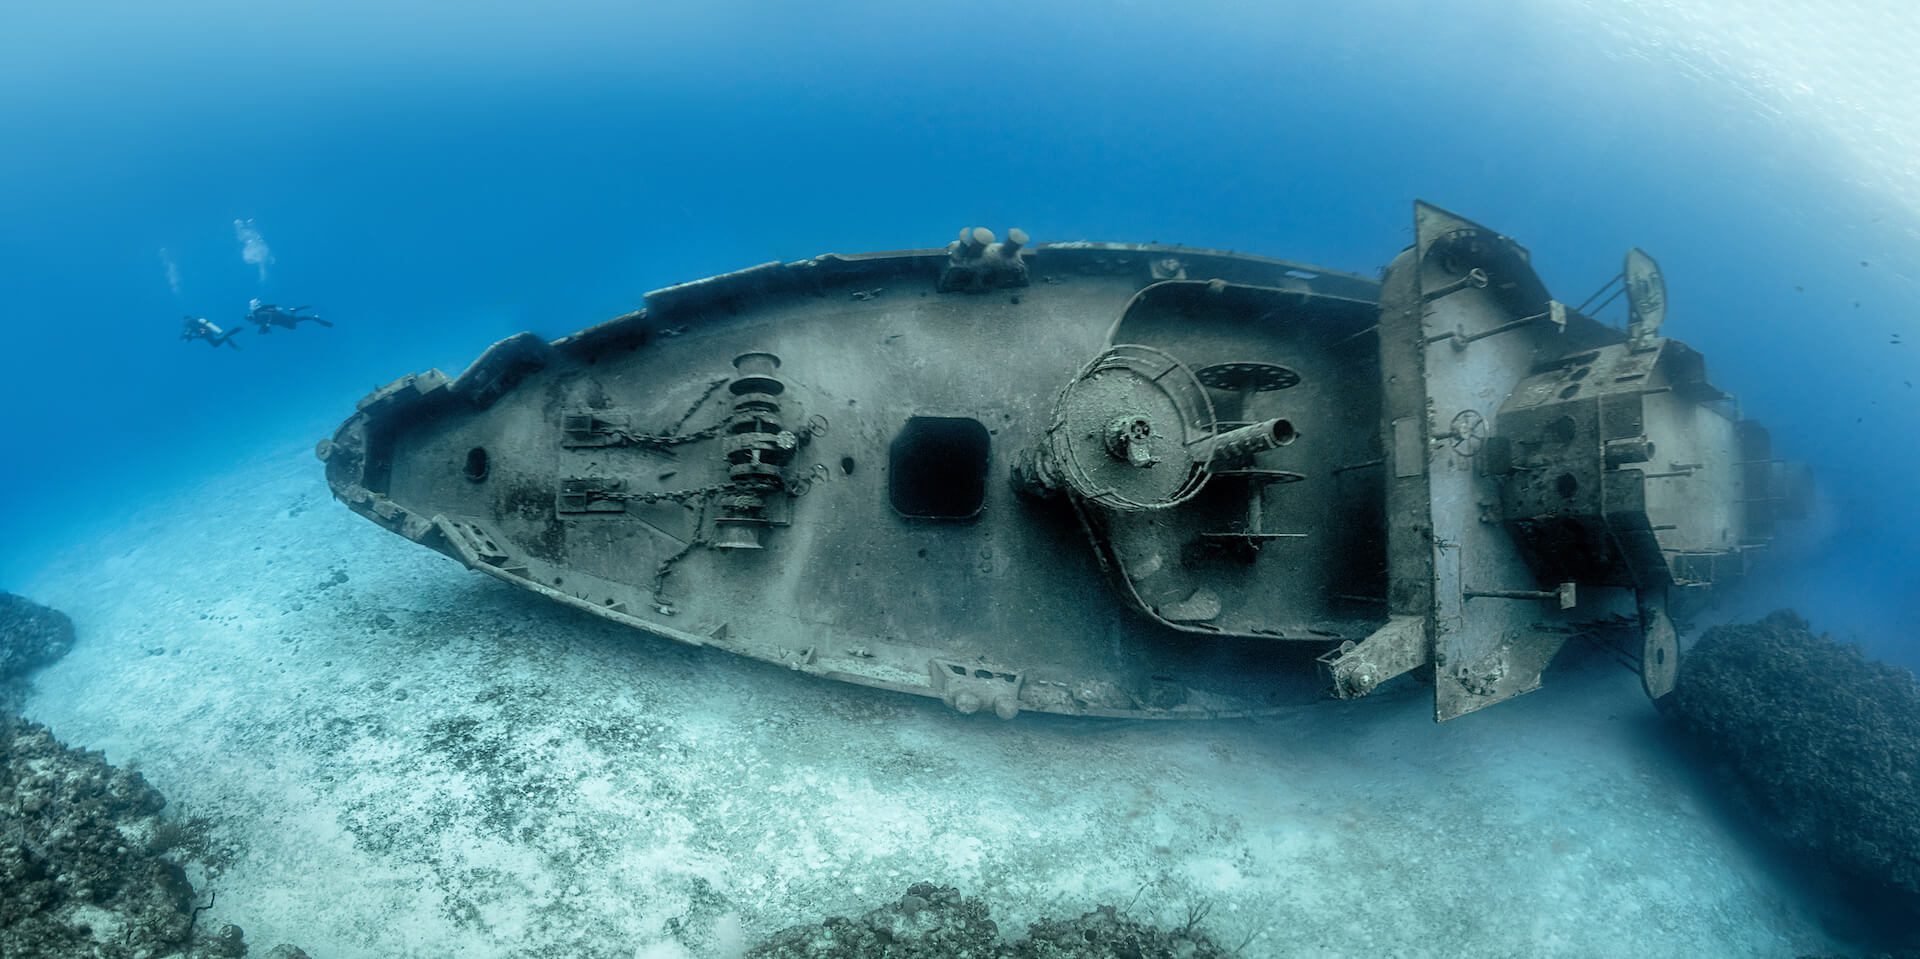 A scuba diver swims under a wrecked boat.